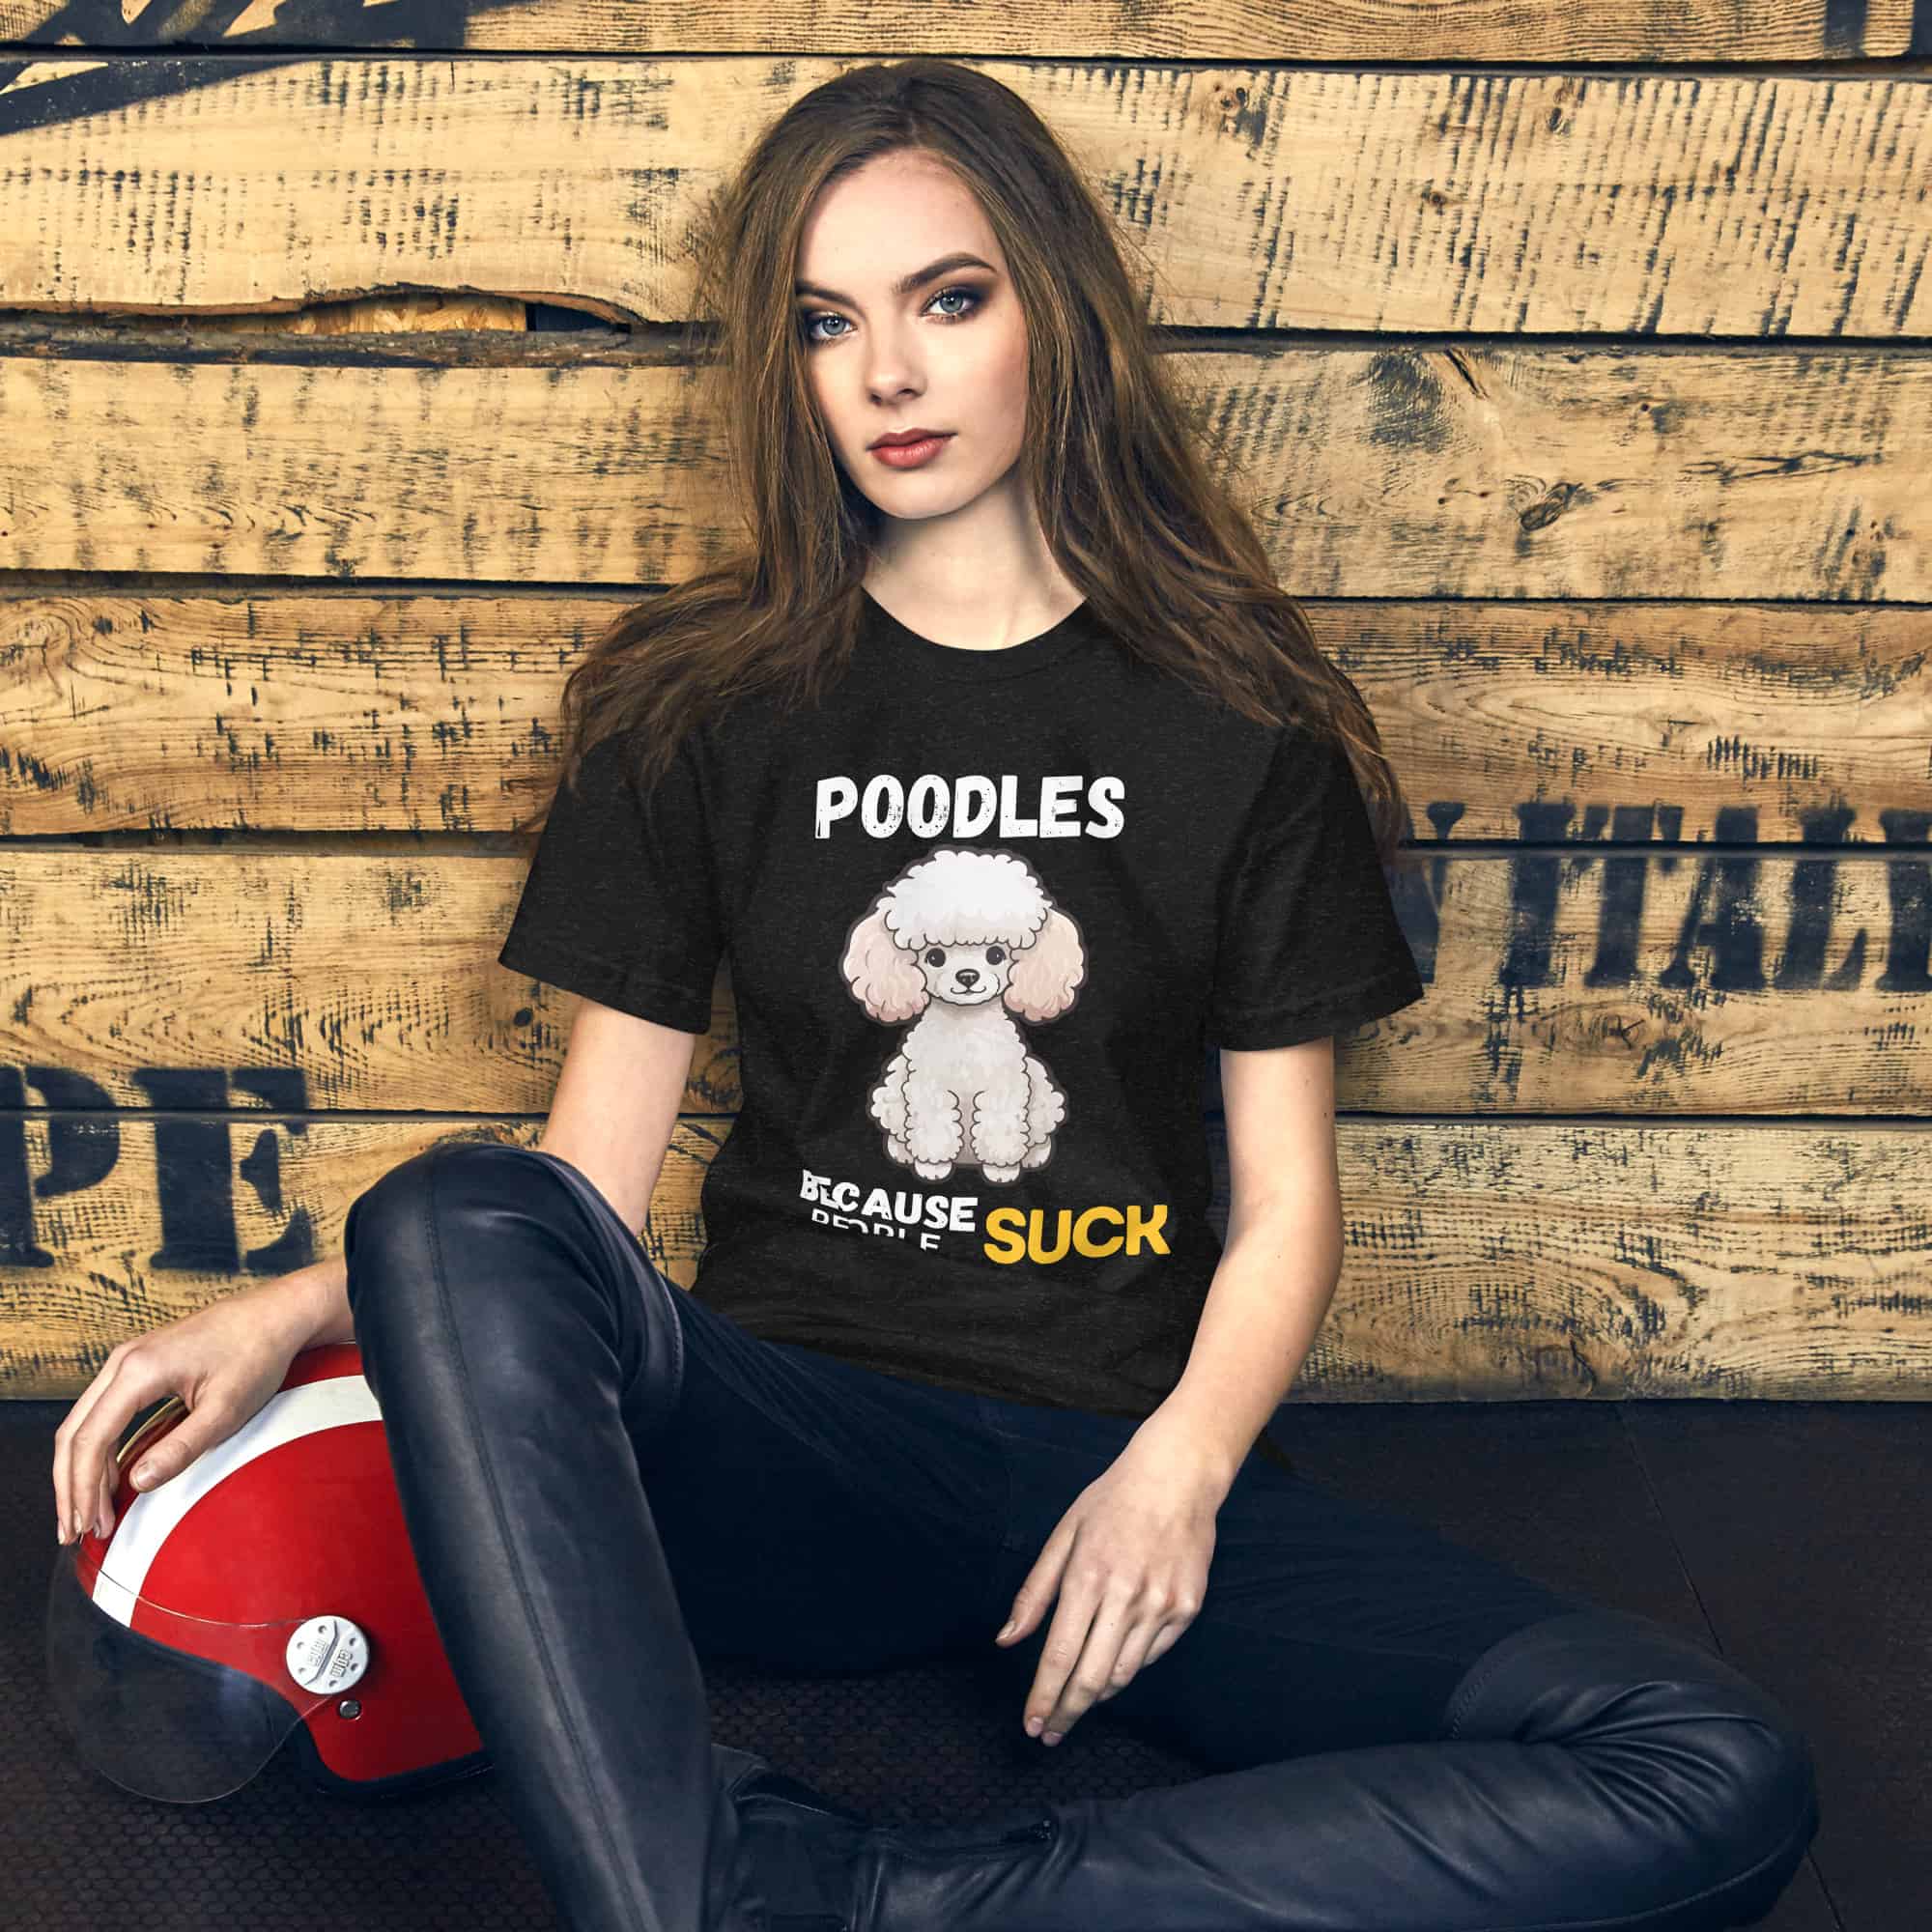 Poodles Because People Suck Unisex T-Shirt female t